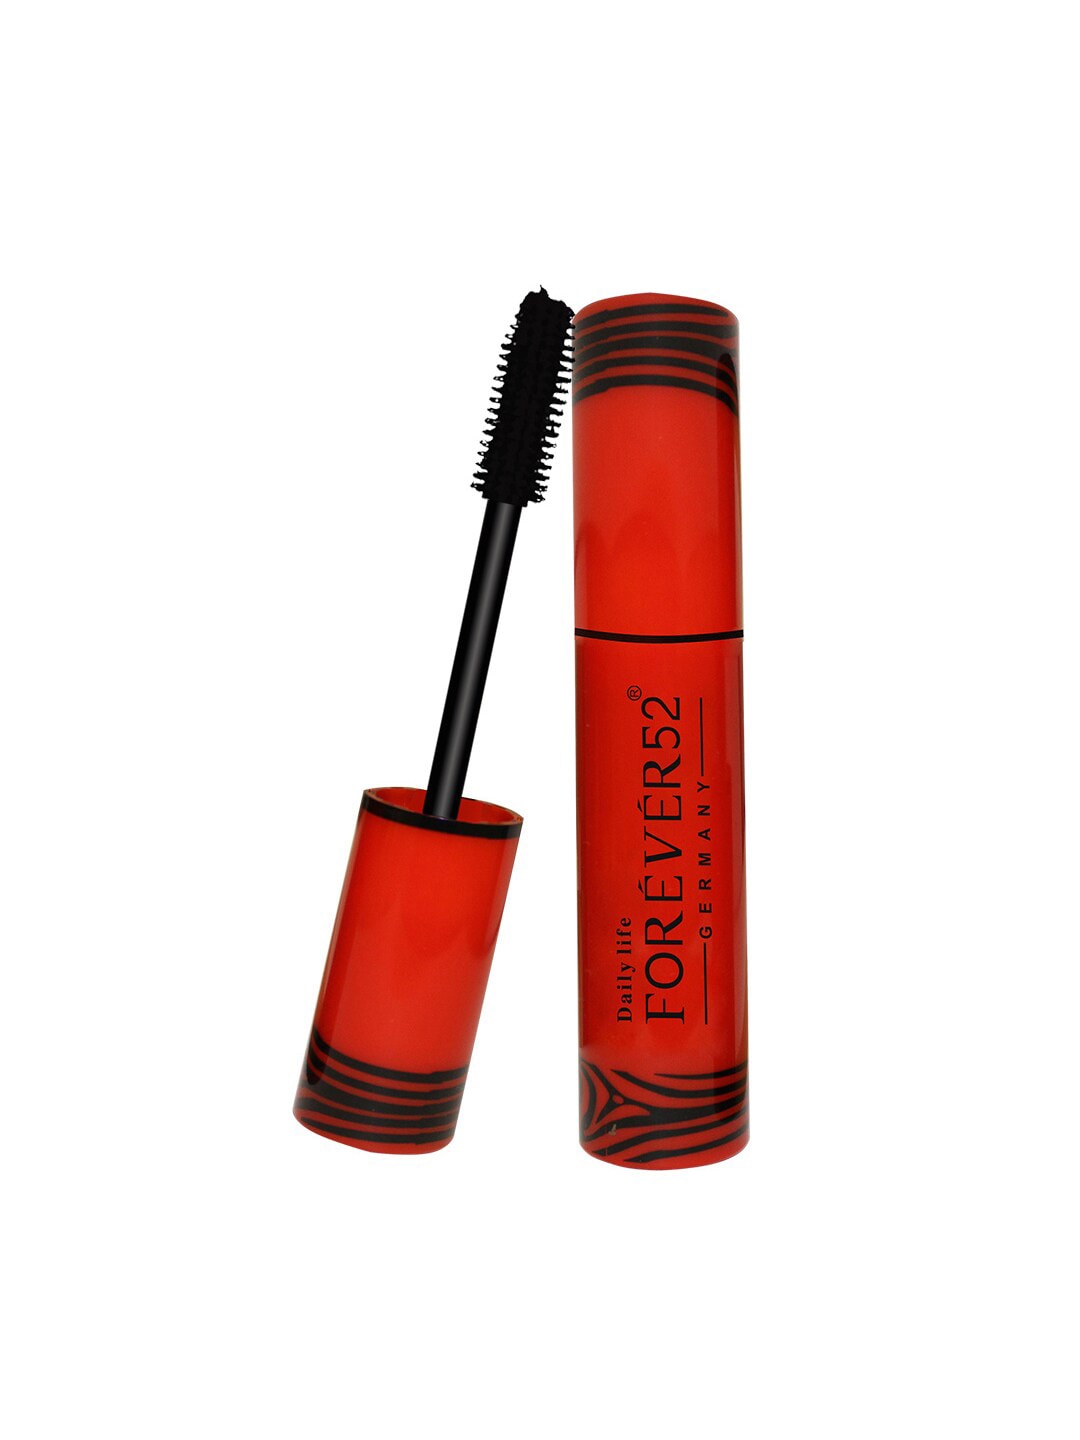 Daily Life Forever52 Volume Mascara 10gm Price in India